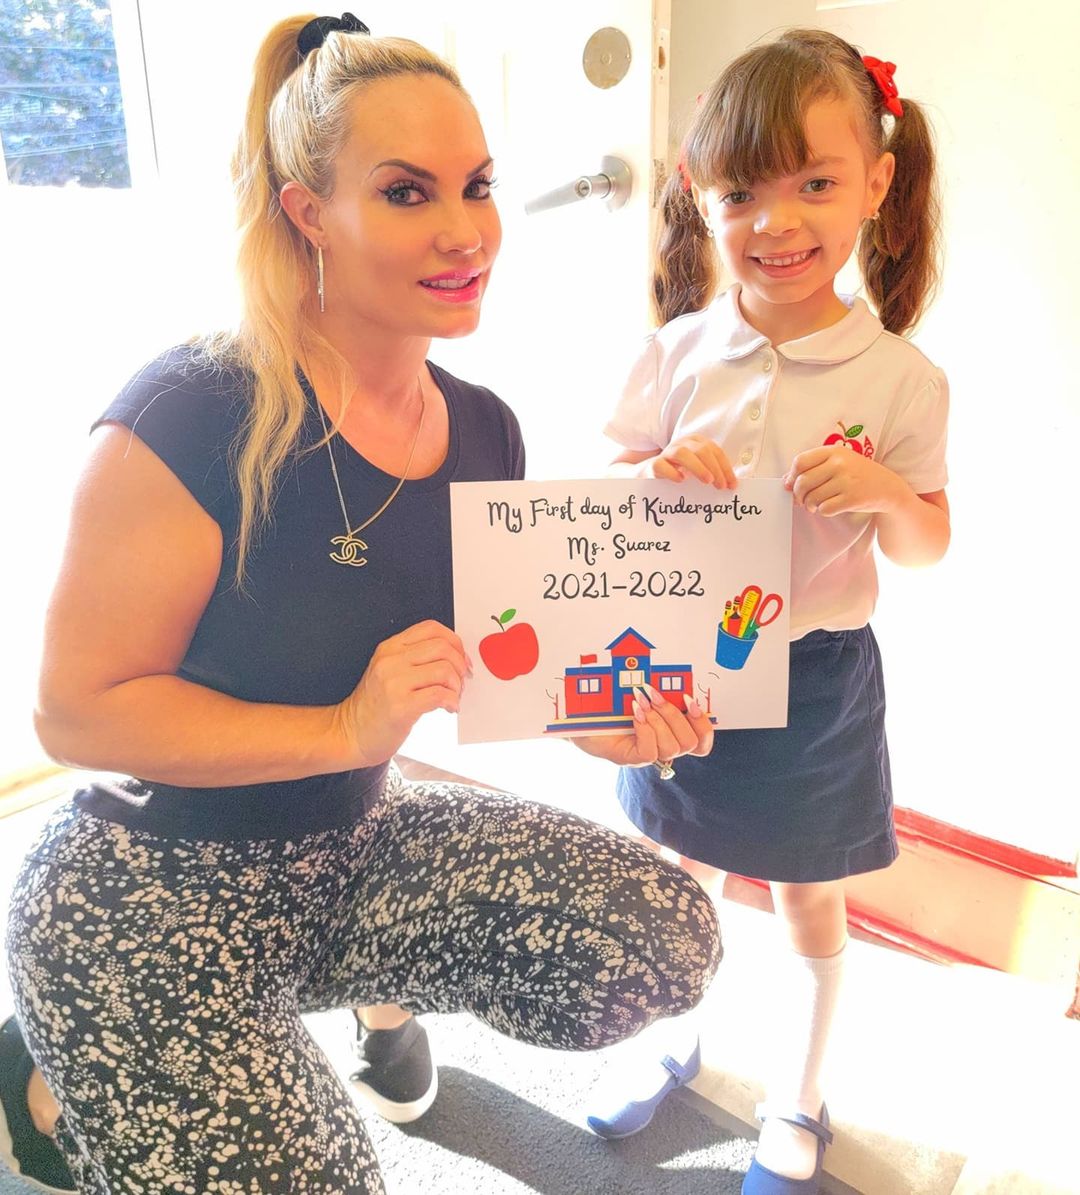 Coco Austin and More Celebs Share Their Kids' 2021 Back to School Pics